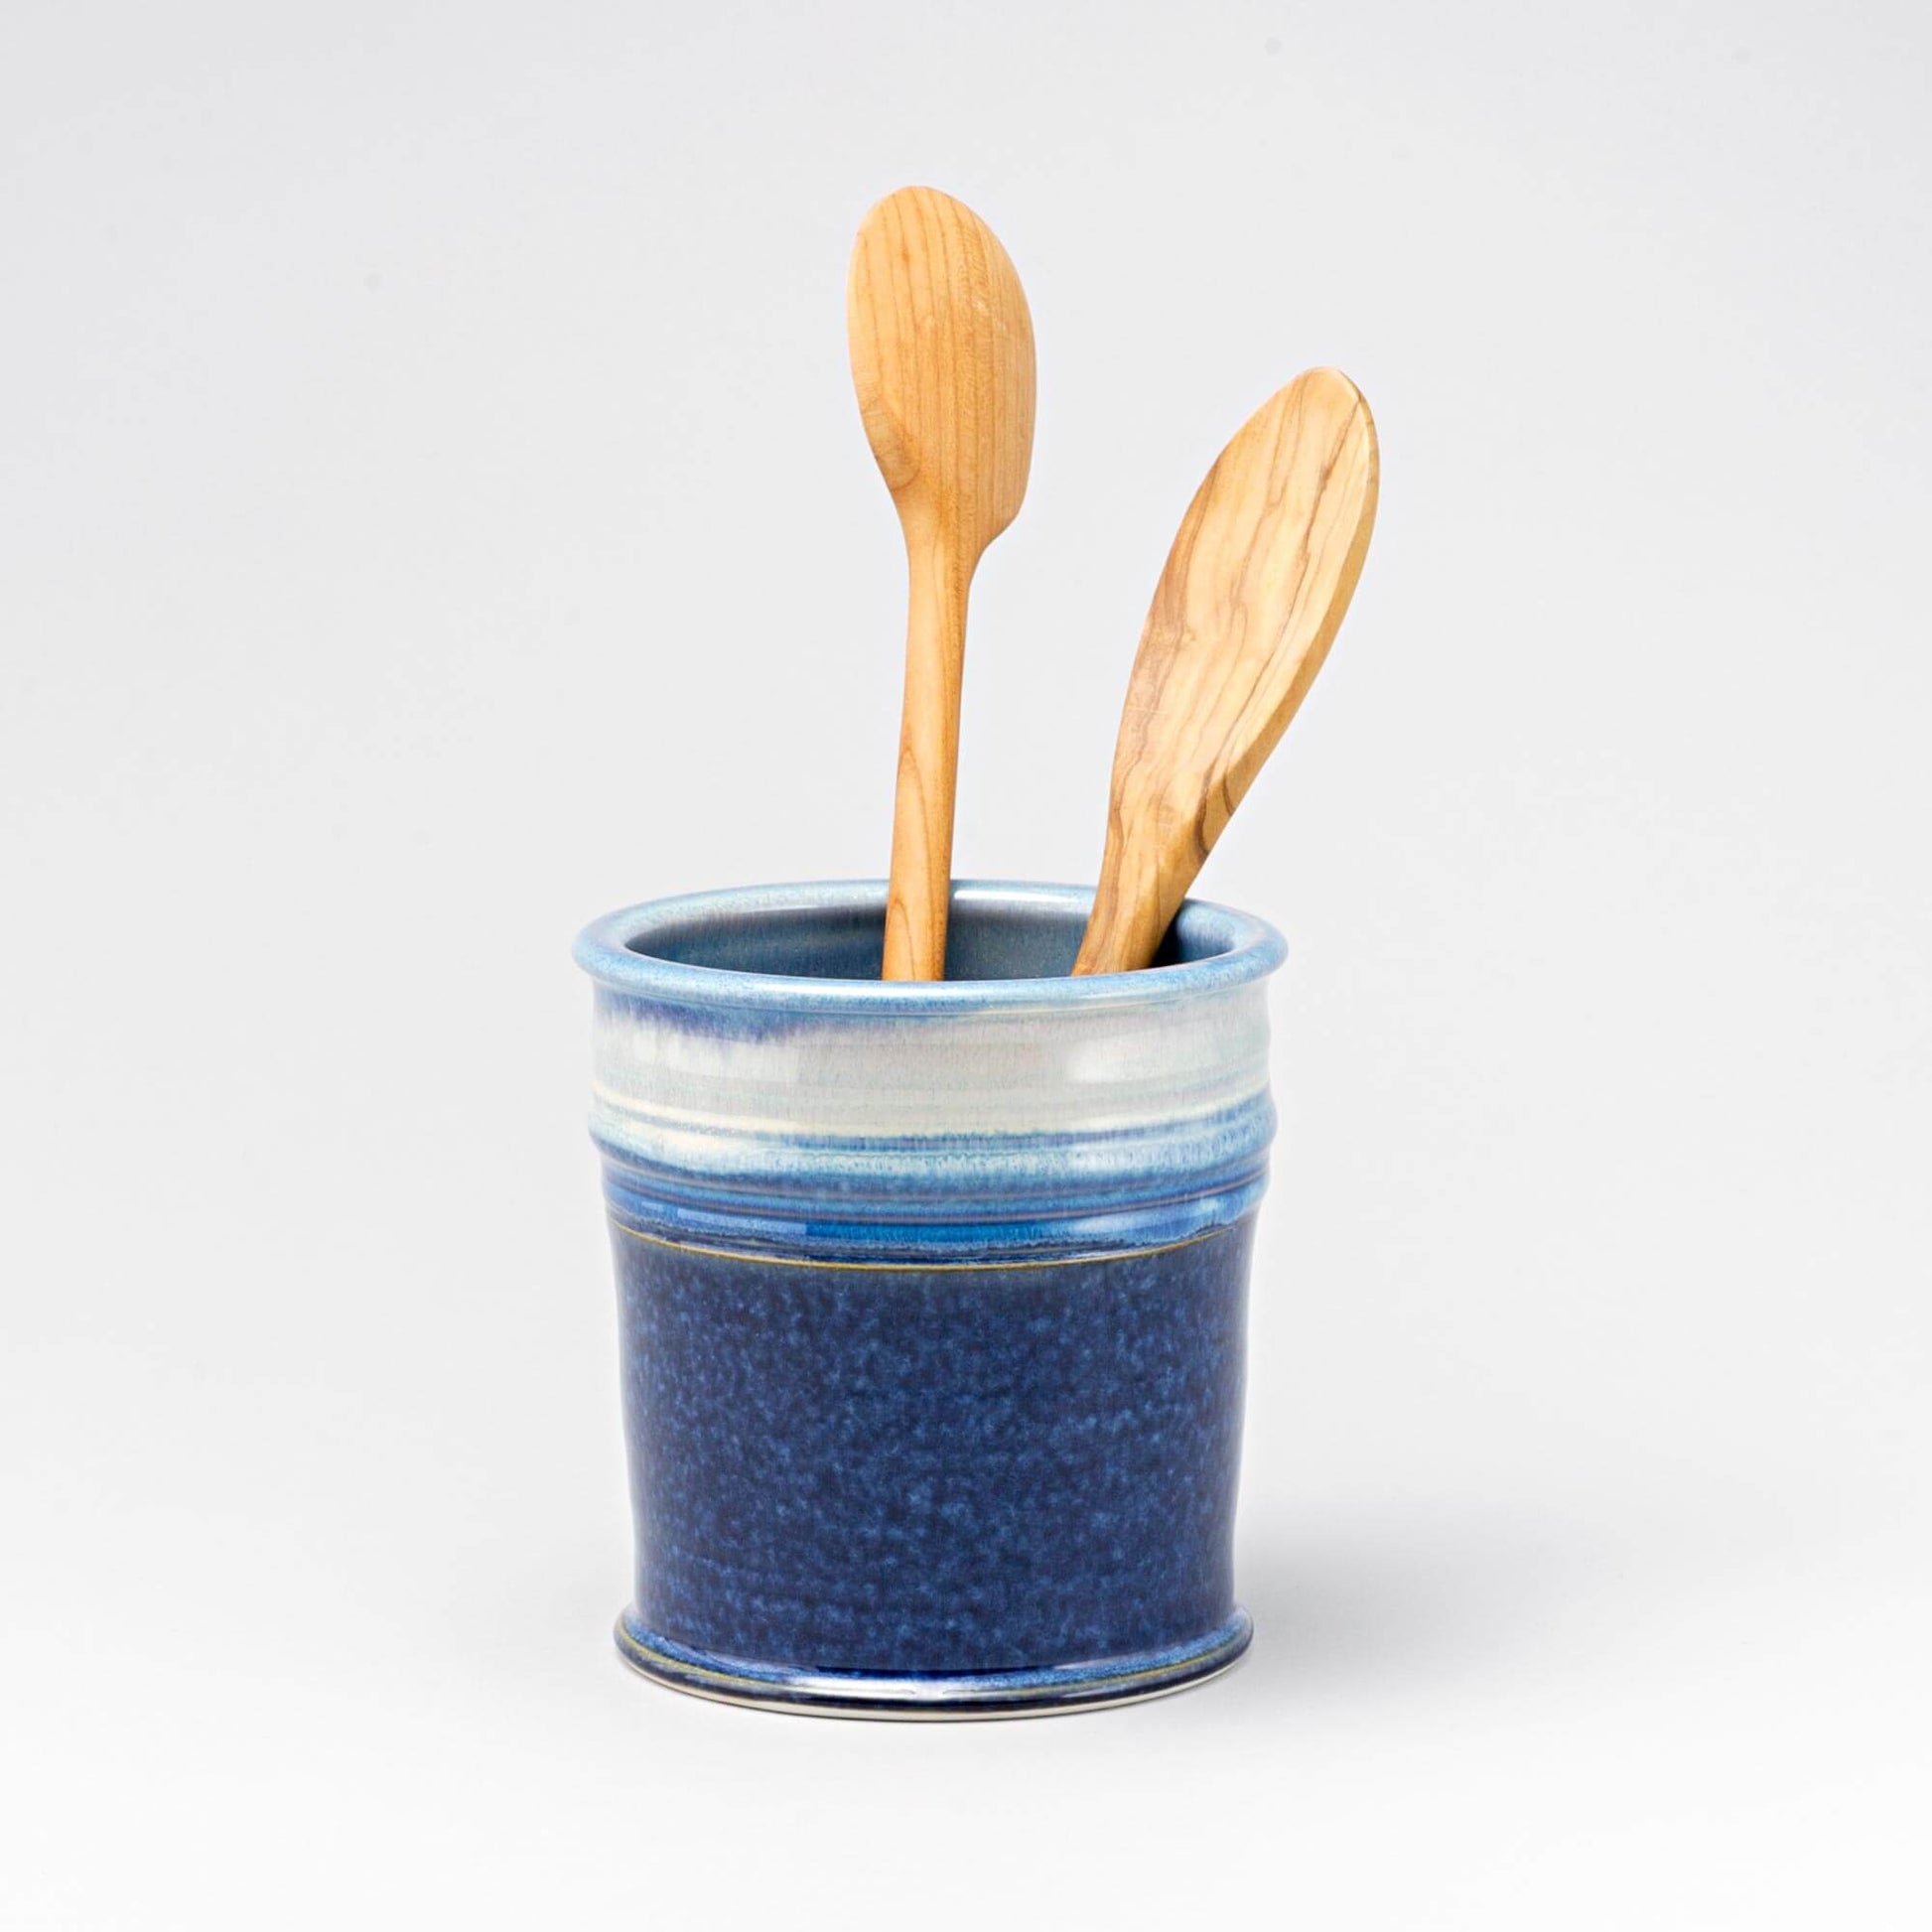 Handmade Pottery Utensil Holder in Cobalt pattern made by Georgetown Pottery in Maine